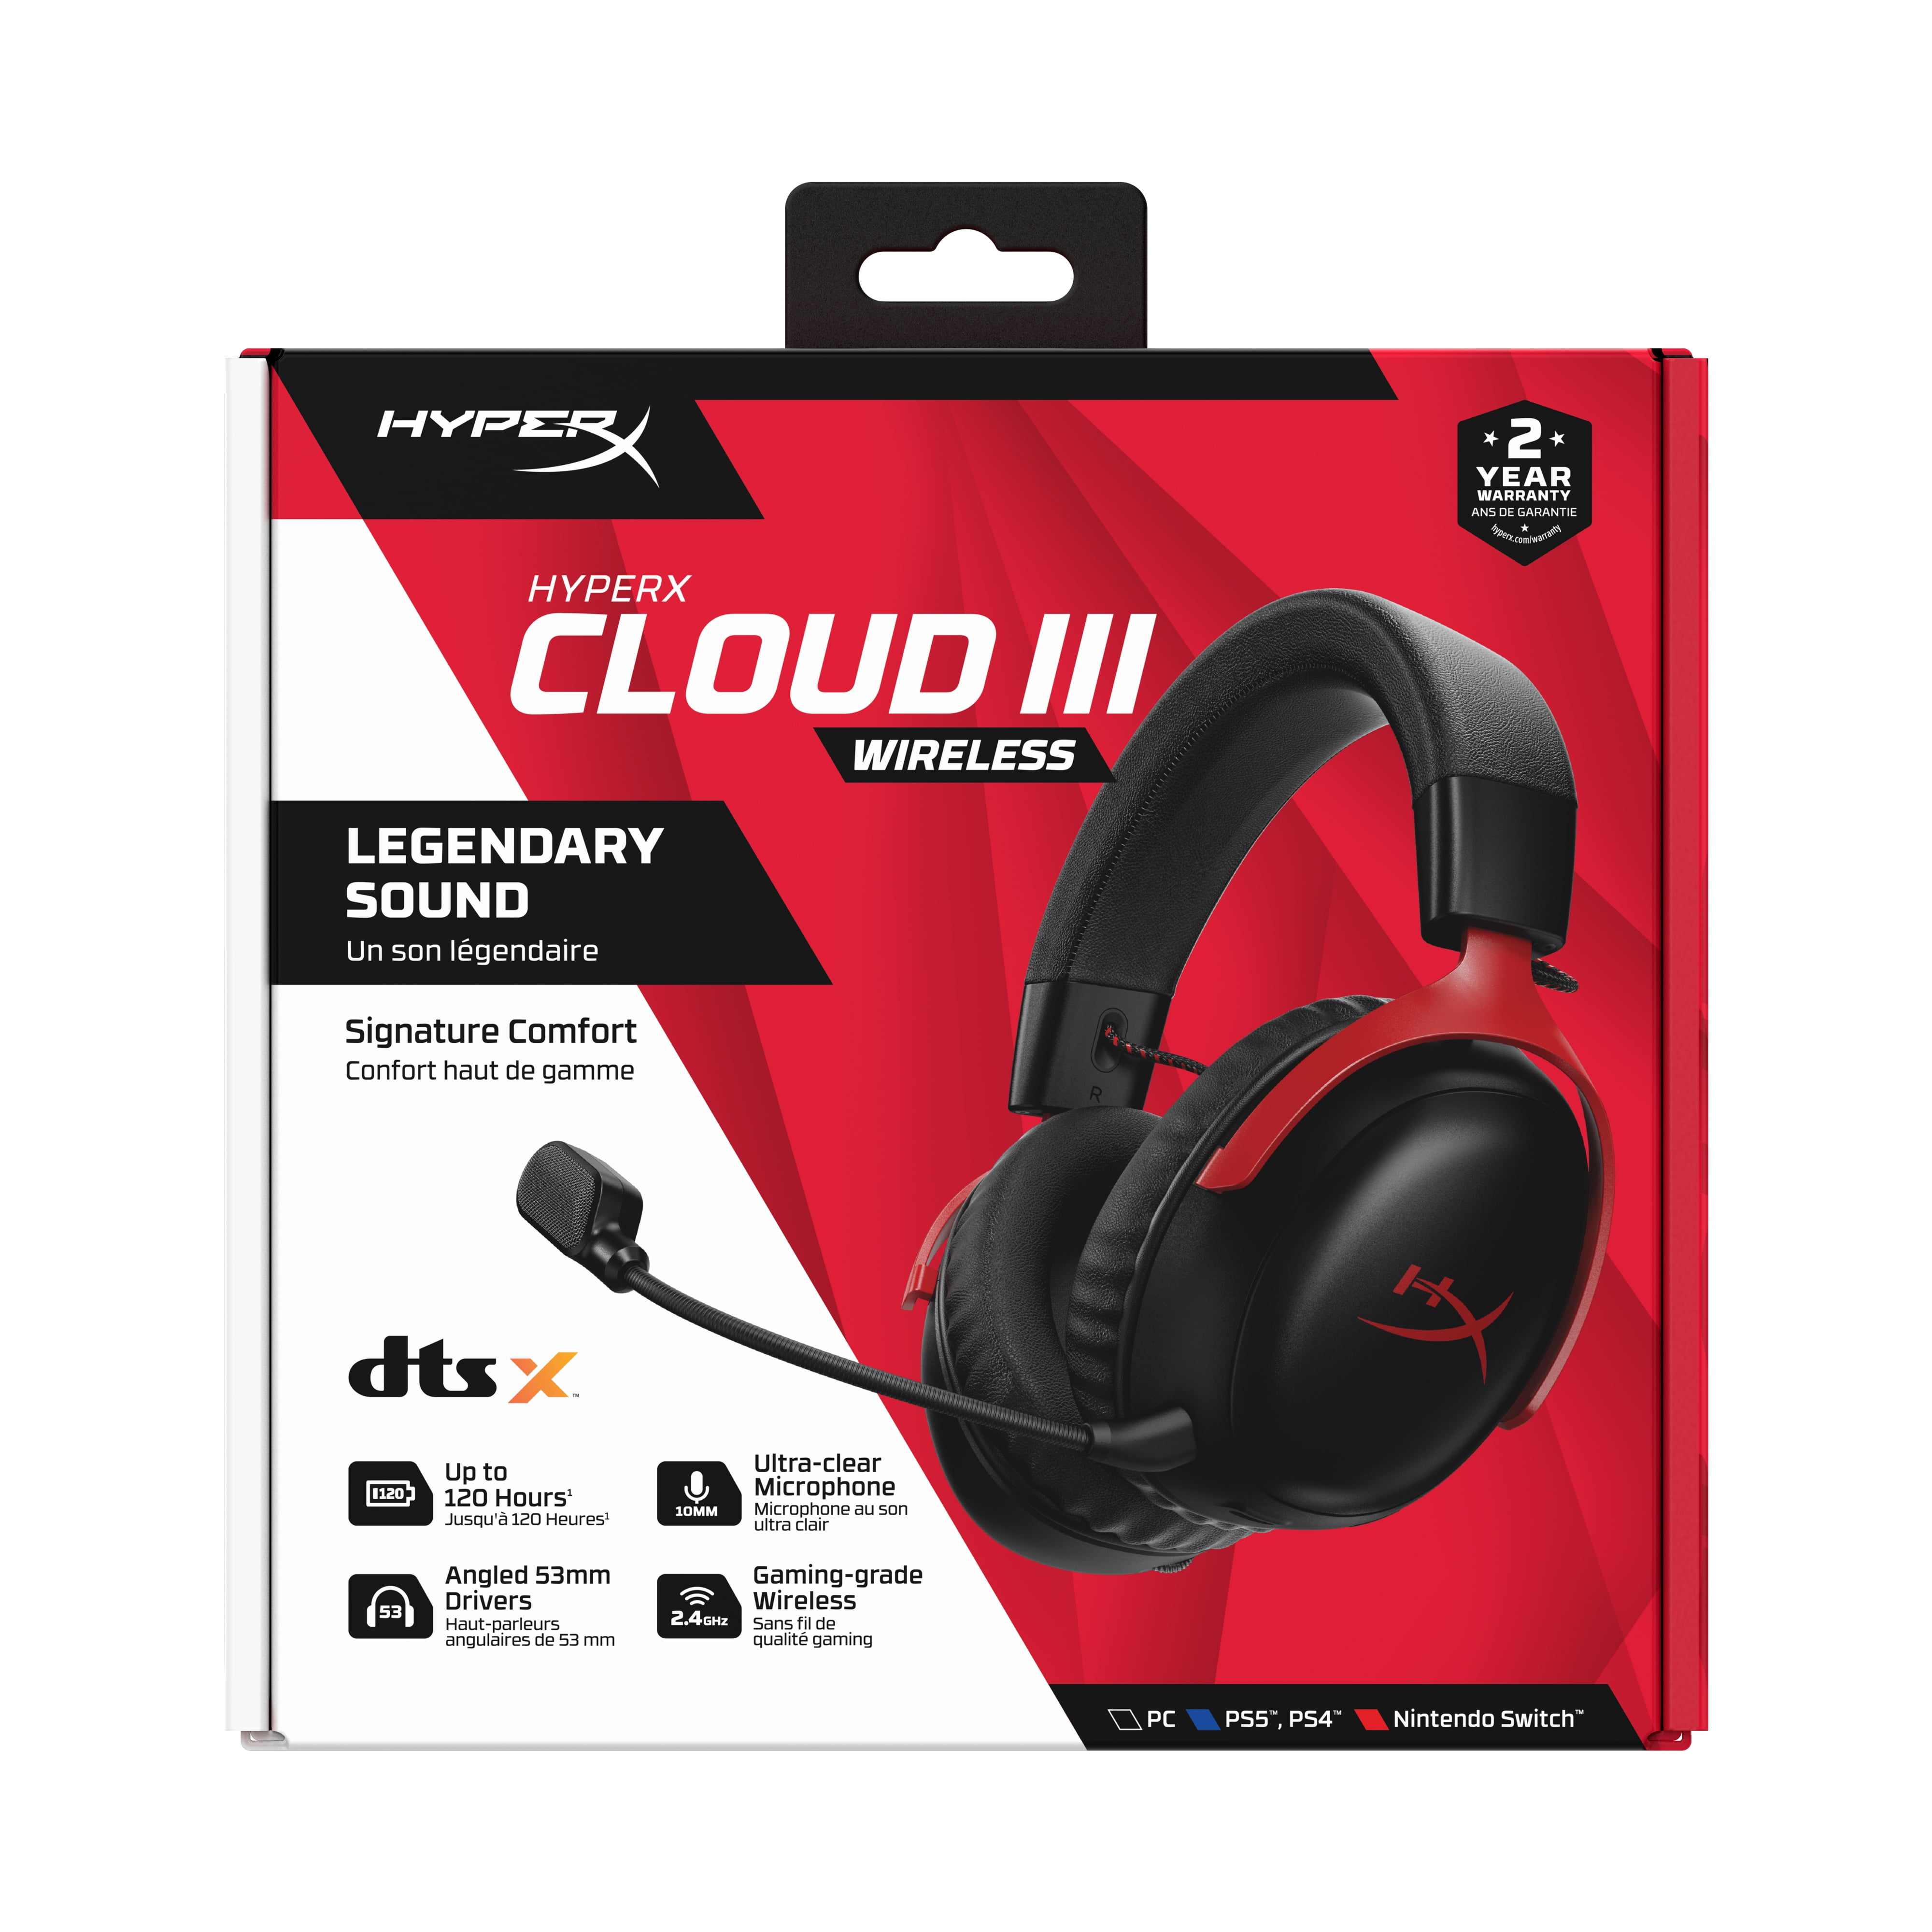 HyperX Cloud III Wireless – Gaming headset for PC, PS5, PS4, up to 120-hour  Battery, 2.4GHz Wireless, 53mm angled drivers, Memory foam, Durable Frame,  10mm microphone – Black/Red